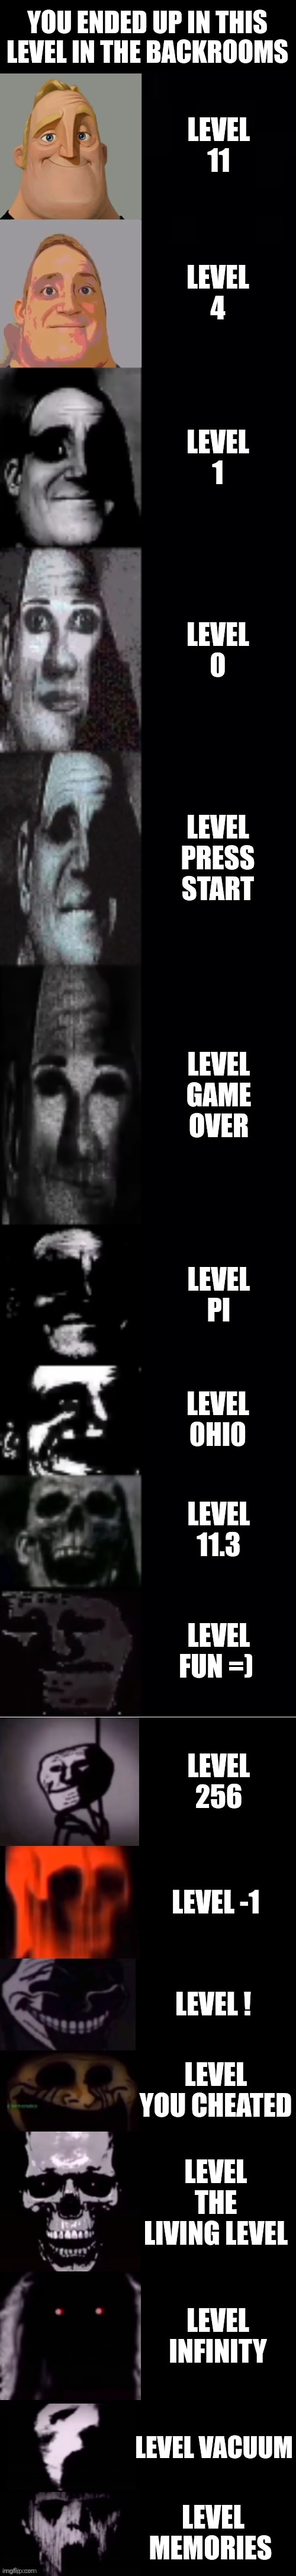 mr incredible becoming uncanny 1st extension | YOU ENDED UP IN THIS LEVEL IN THE BACKROOMS; LEVEL 11; LEVEL 4; LEVEL 1; LEVEL 0; LEVEL PRESS START; LEVEL GAME OVER; LEVEL PI; LEVEL 0HI0; LEVEL 11.3; LEVEL FUN =); LEVEL 256; LEVEL -1; LEVEL ! LEVEL YOU CHEATED; LEVEL THE LIVING LEVEL; LEVEL INFINITY; LEVEL VACUUM; LEVEL MEMORIES | image tagged in mr incredible becoming uncanny 1st extension | made w/ Imgflip meme maker